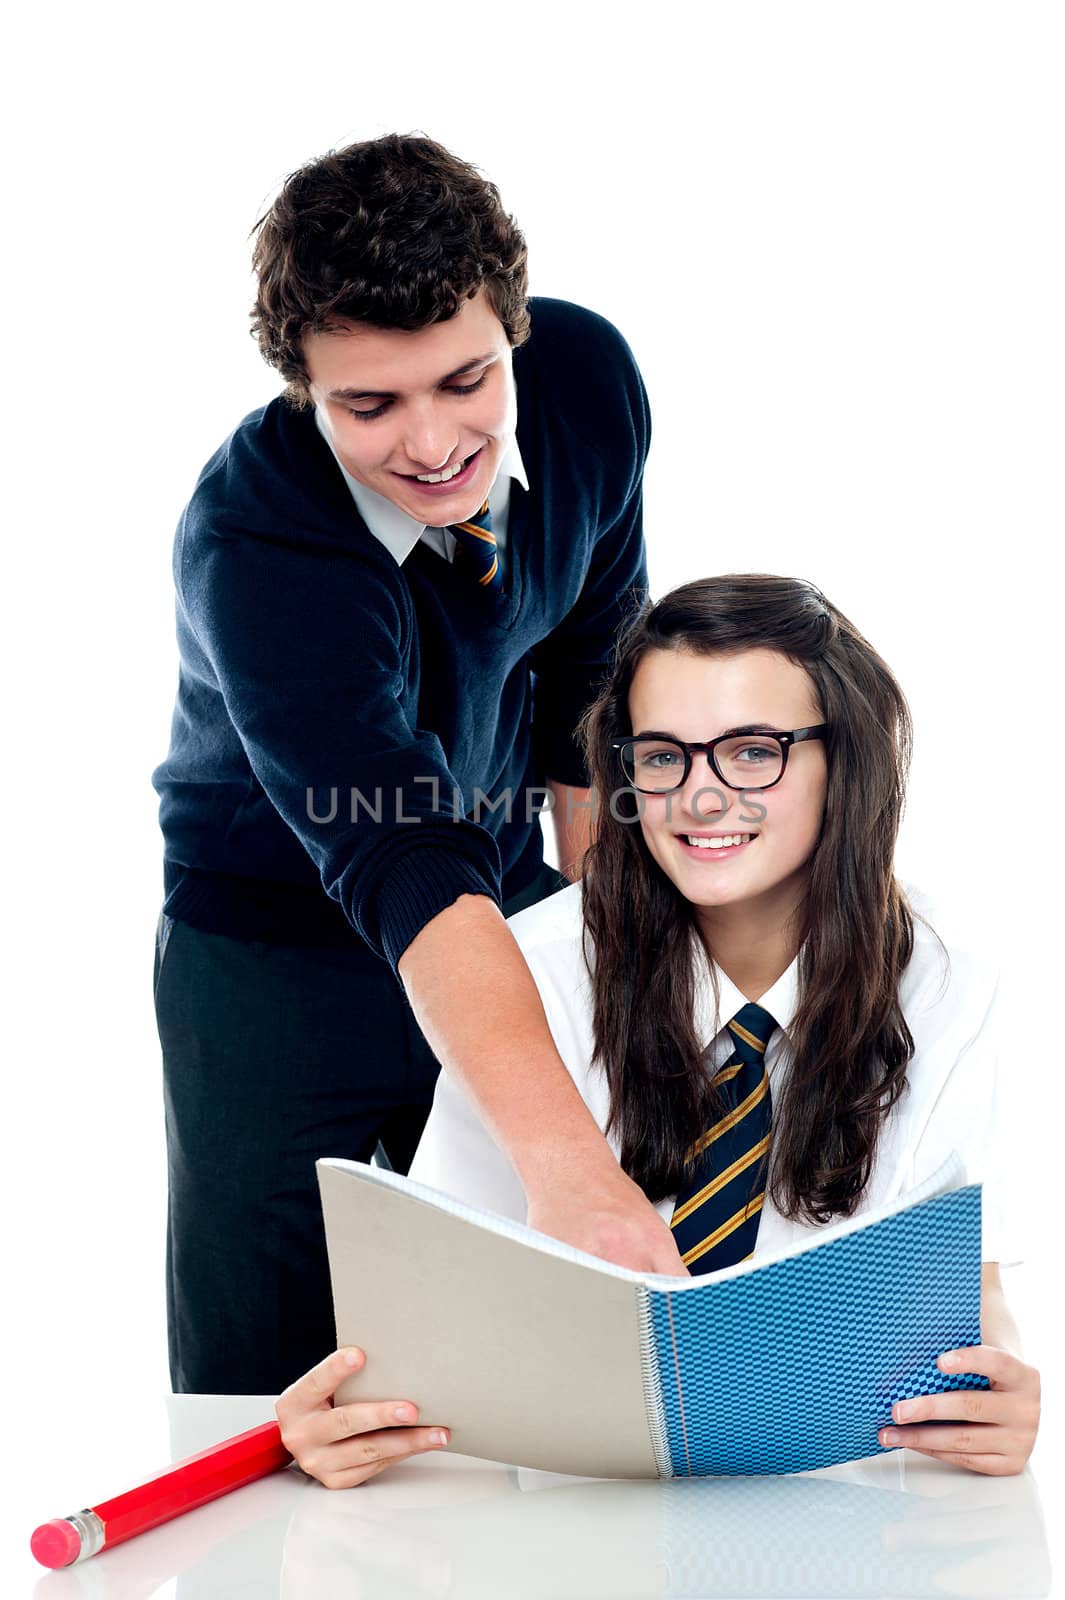 Boy pointing out the answer to the bespectacled girl in her book. All on white background